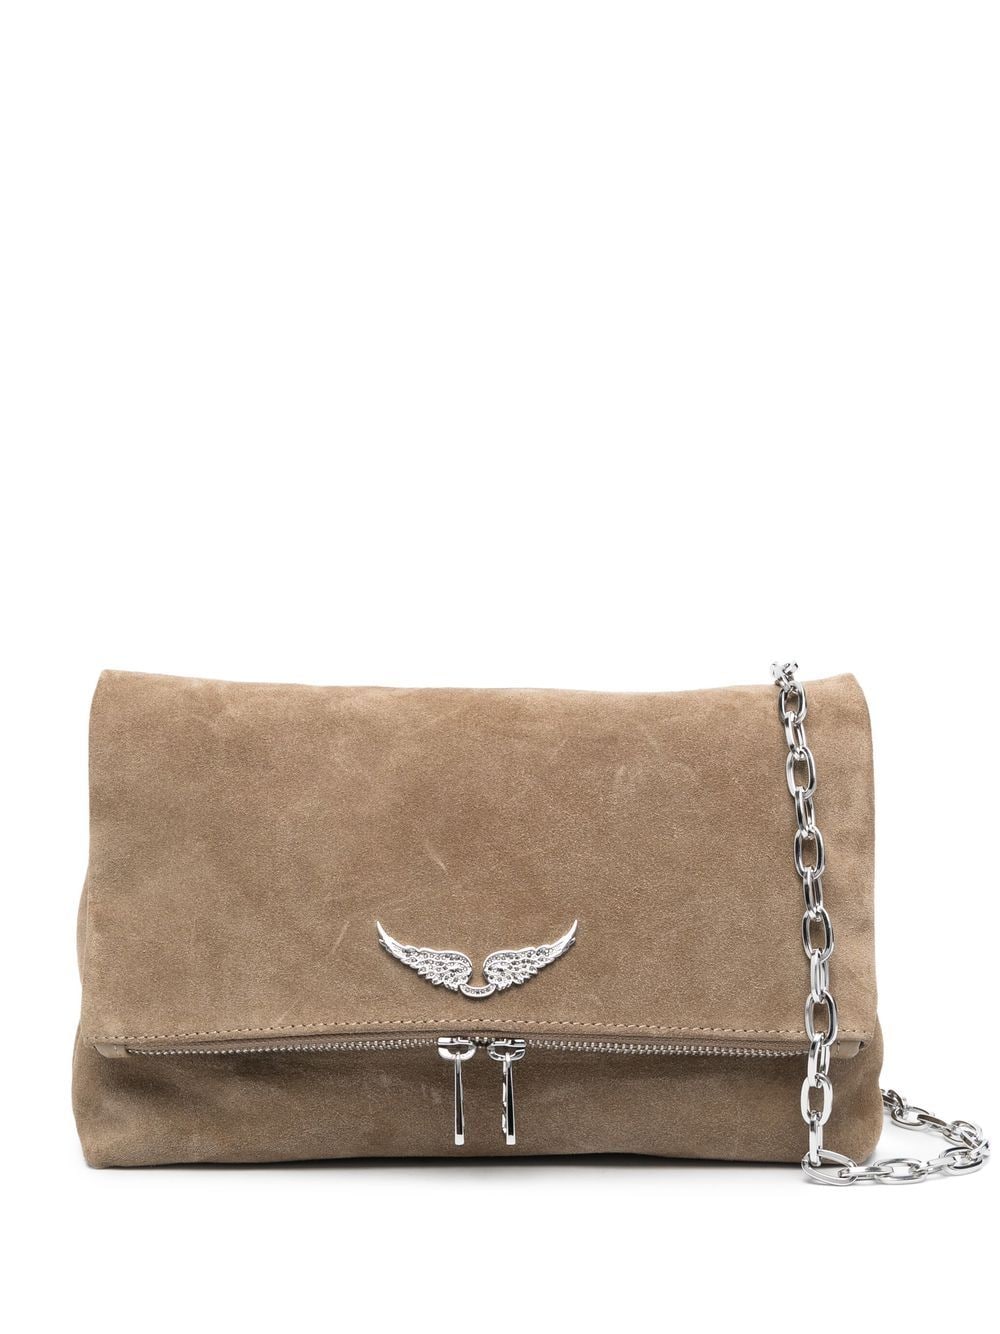 Rocky Suede Bag by Zadig & Voltaire at ORCHARD MILE